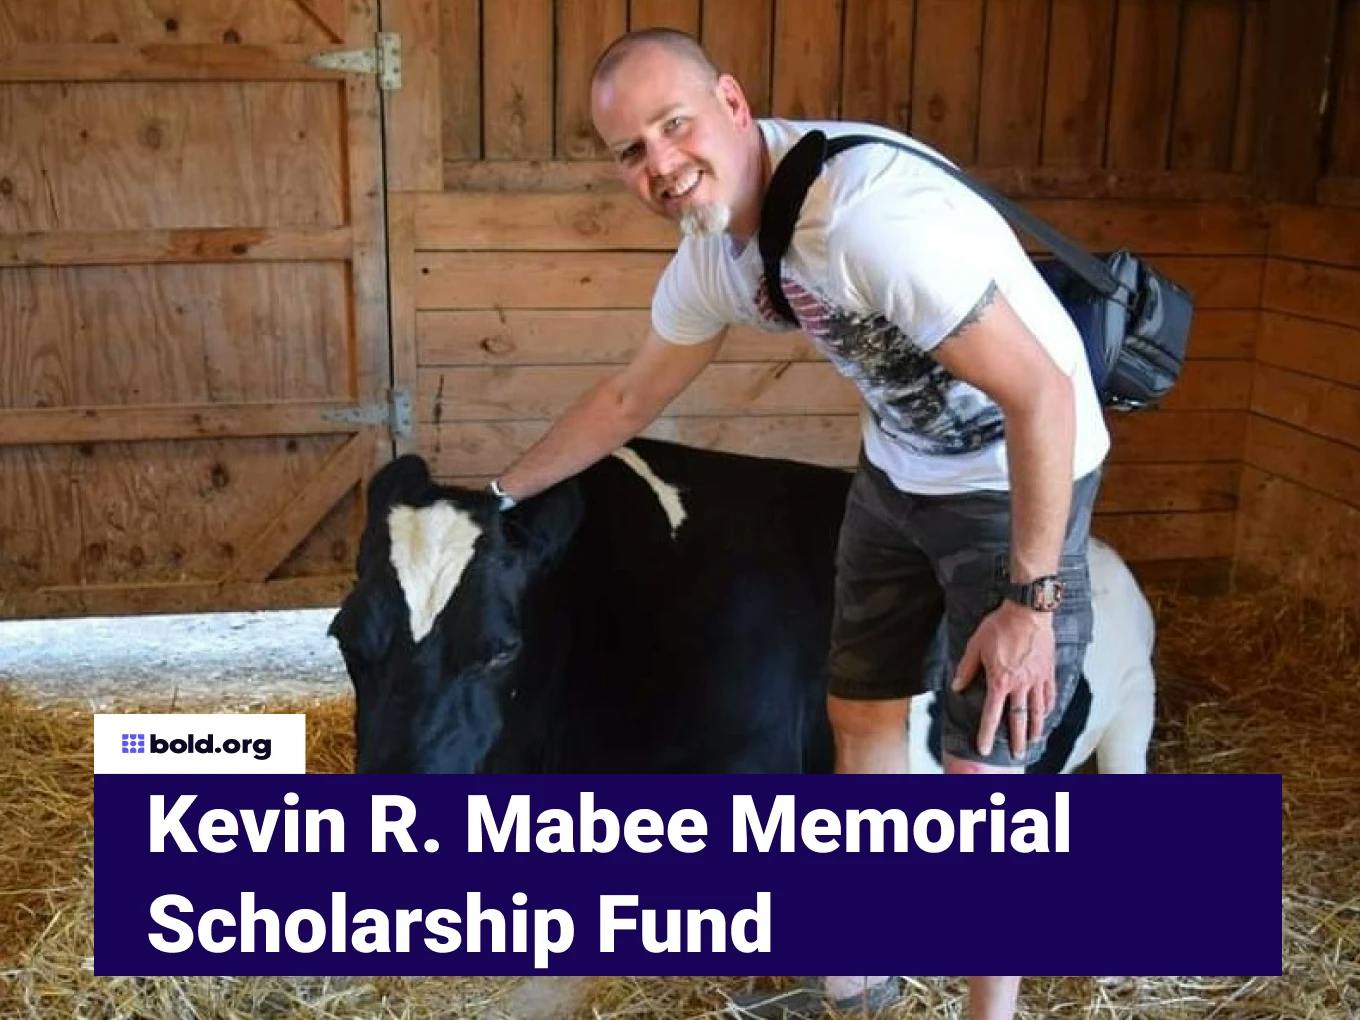 Kevin R. Mabee Memorial Scholarship Fund